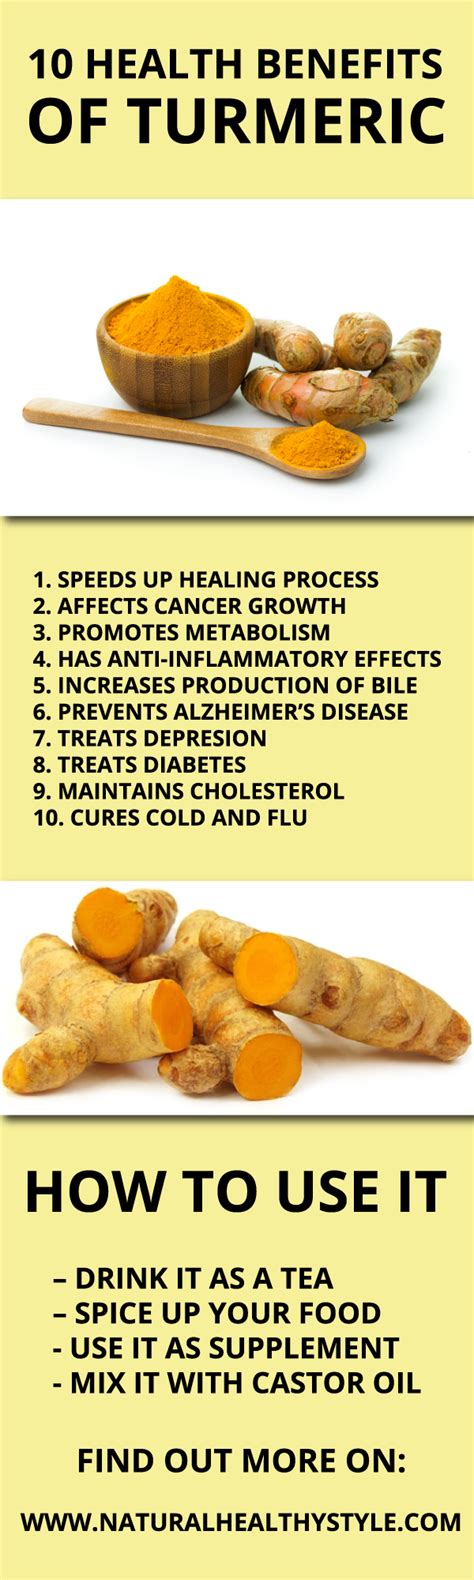 Turmeric Has Been Used As A Herb Over The Centuries For Its Anti